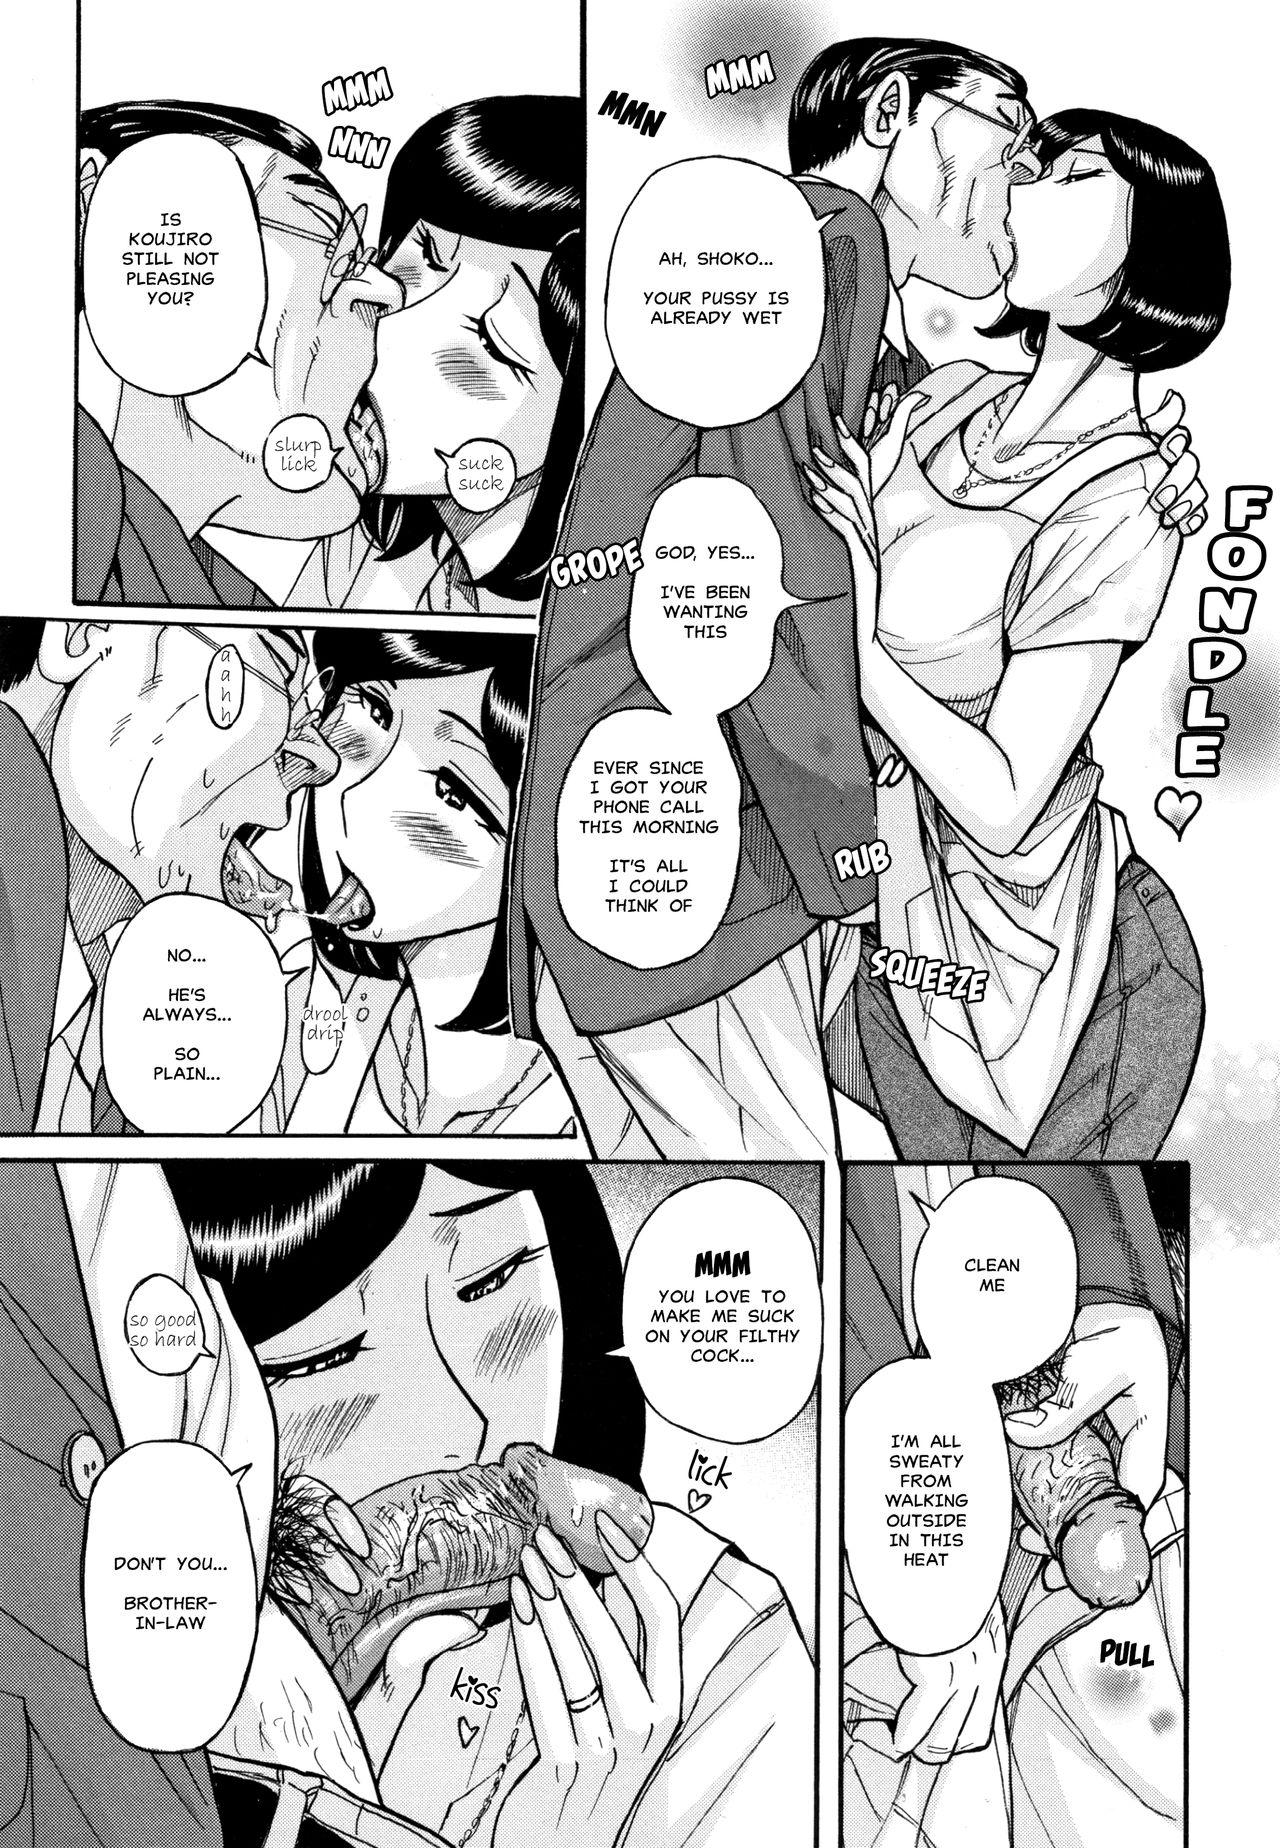 Step Sister PLEASE EXPUNGE Deepthroat - Page 10